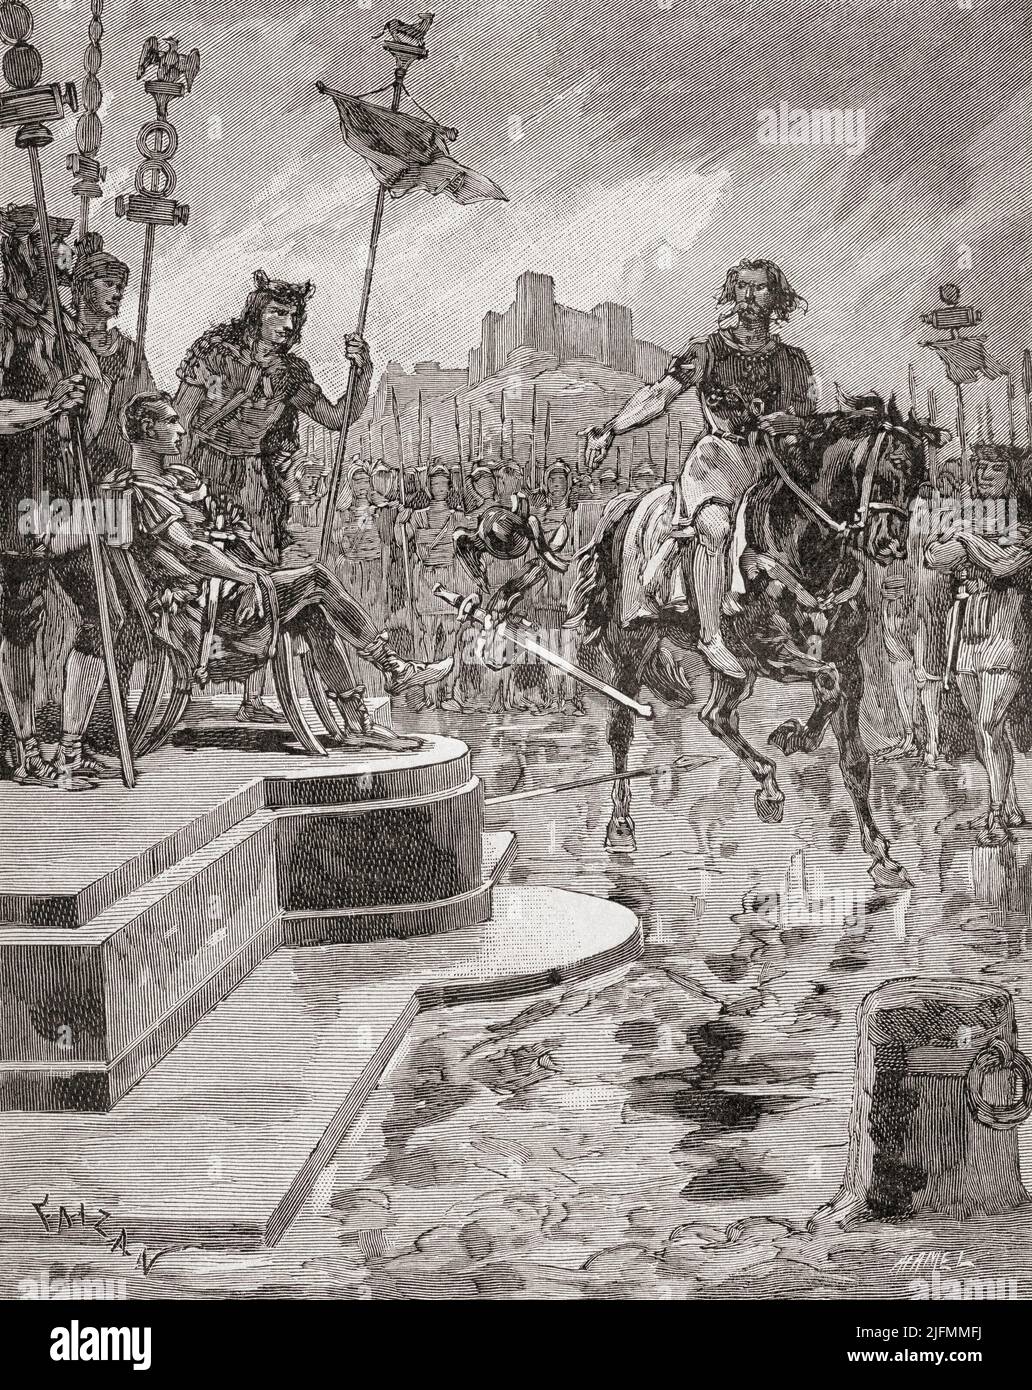 Vercingetorix throws down his arms at the feet of Julius Caesar, 52 BC.  After this he was imprisoned in the Tullianum in Rome for five years, before being publicly displayed in Caesar's triumph in 46 BC. He was executed after the triumph, probably by strangulation in his prison.  Vercingetorix, c. 82 BC – 46 BC.  Chieftain of the Arverni tribe.  From Histoire de France, published 1855. Stock Photo